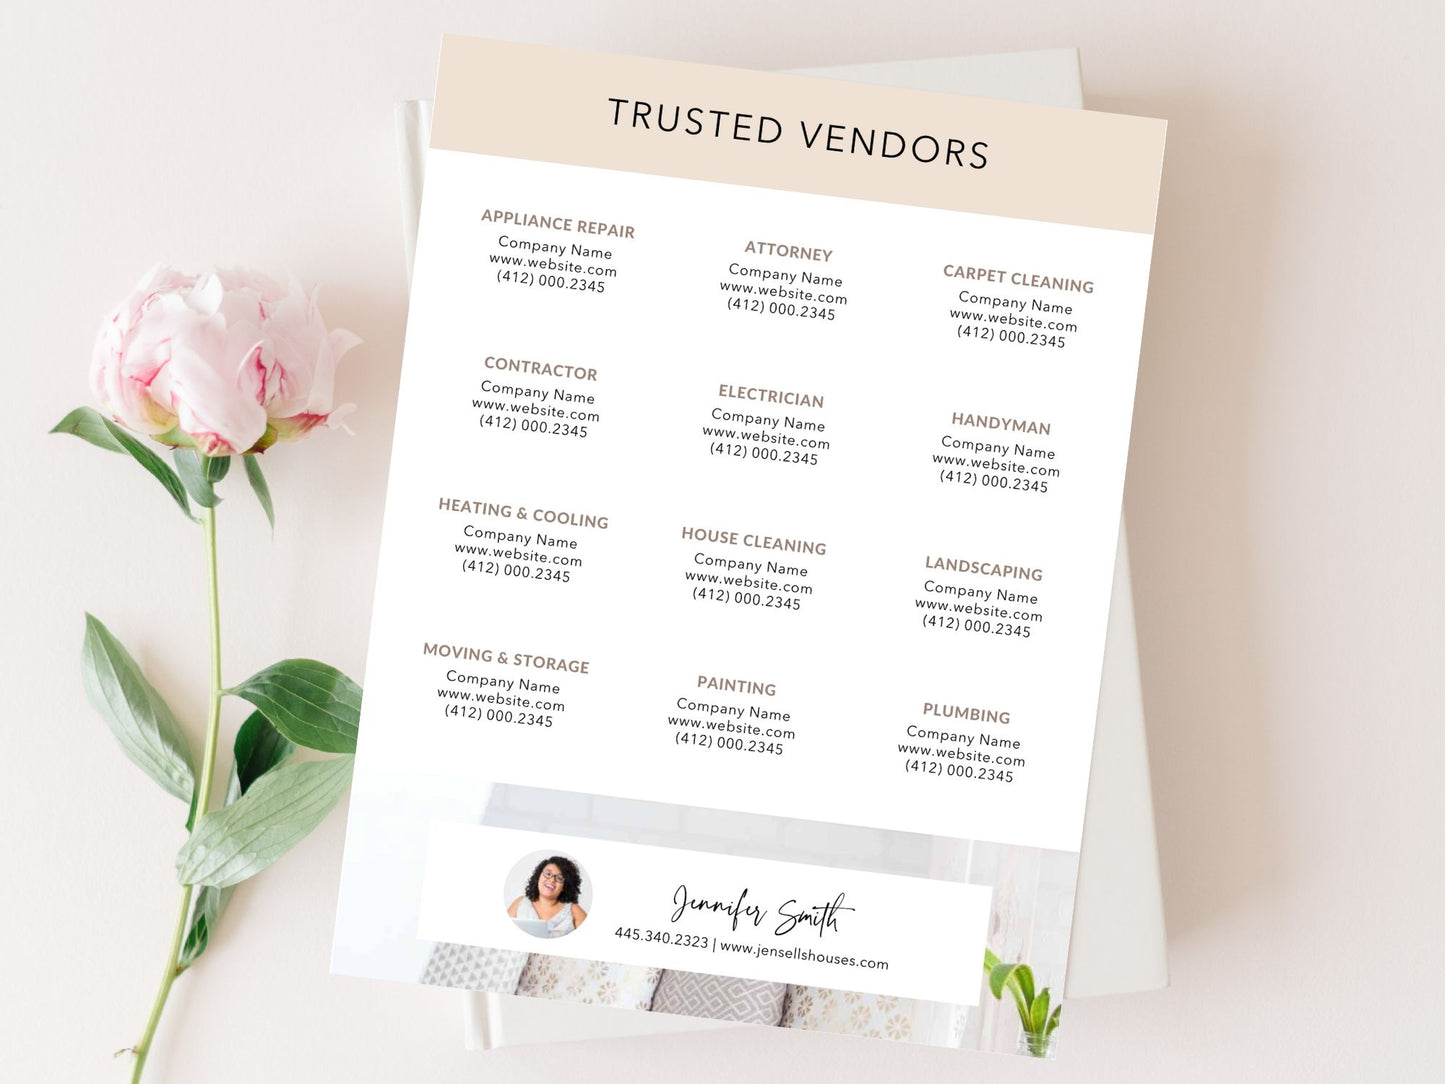 Real Estate Trusted Vendors Flyer - Editable template for connecting clients with reliable service providers in the real estate market.